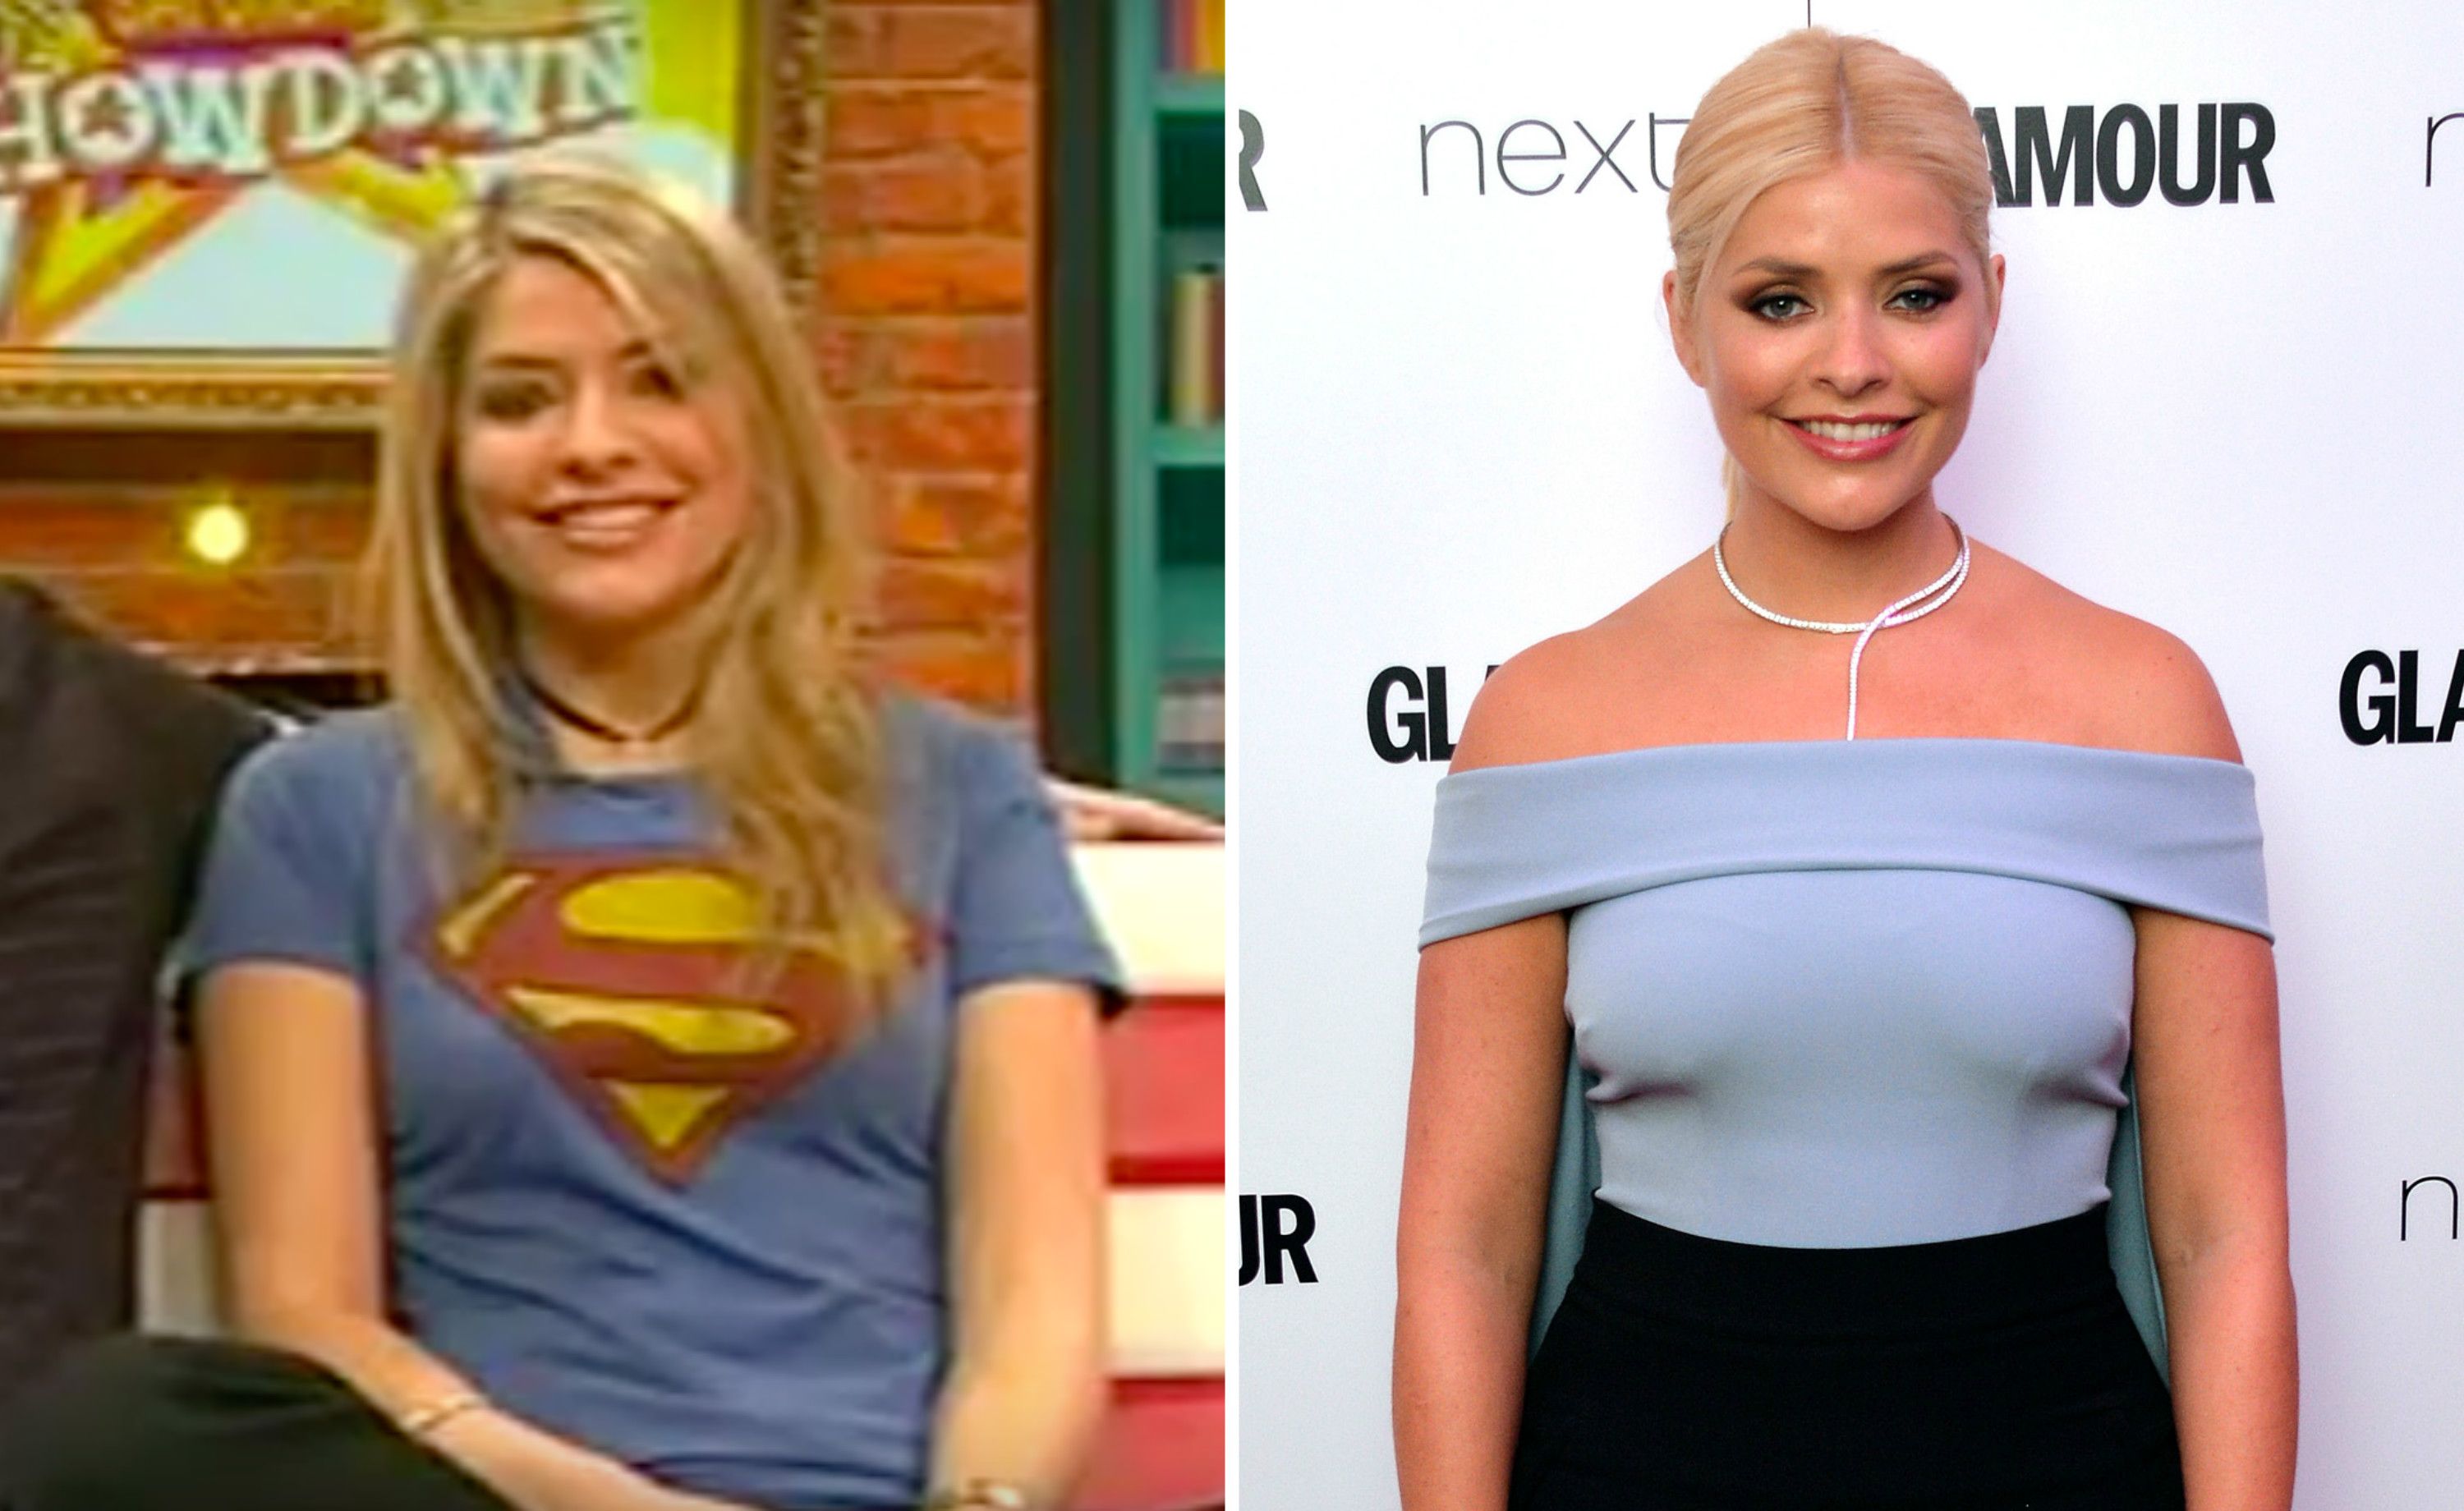 Holly Willoughby reveals her boob popped out of her dress and she